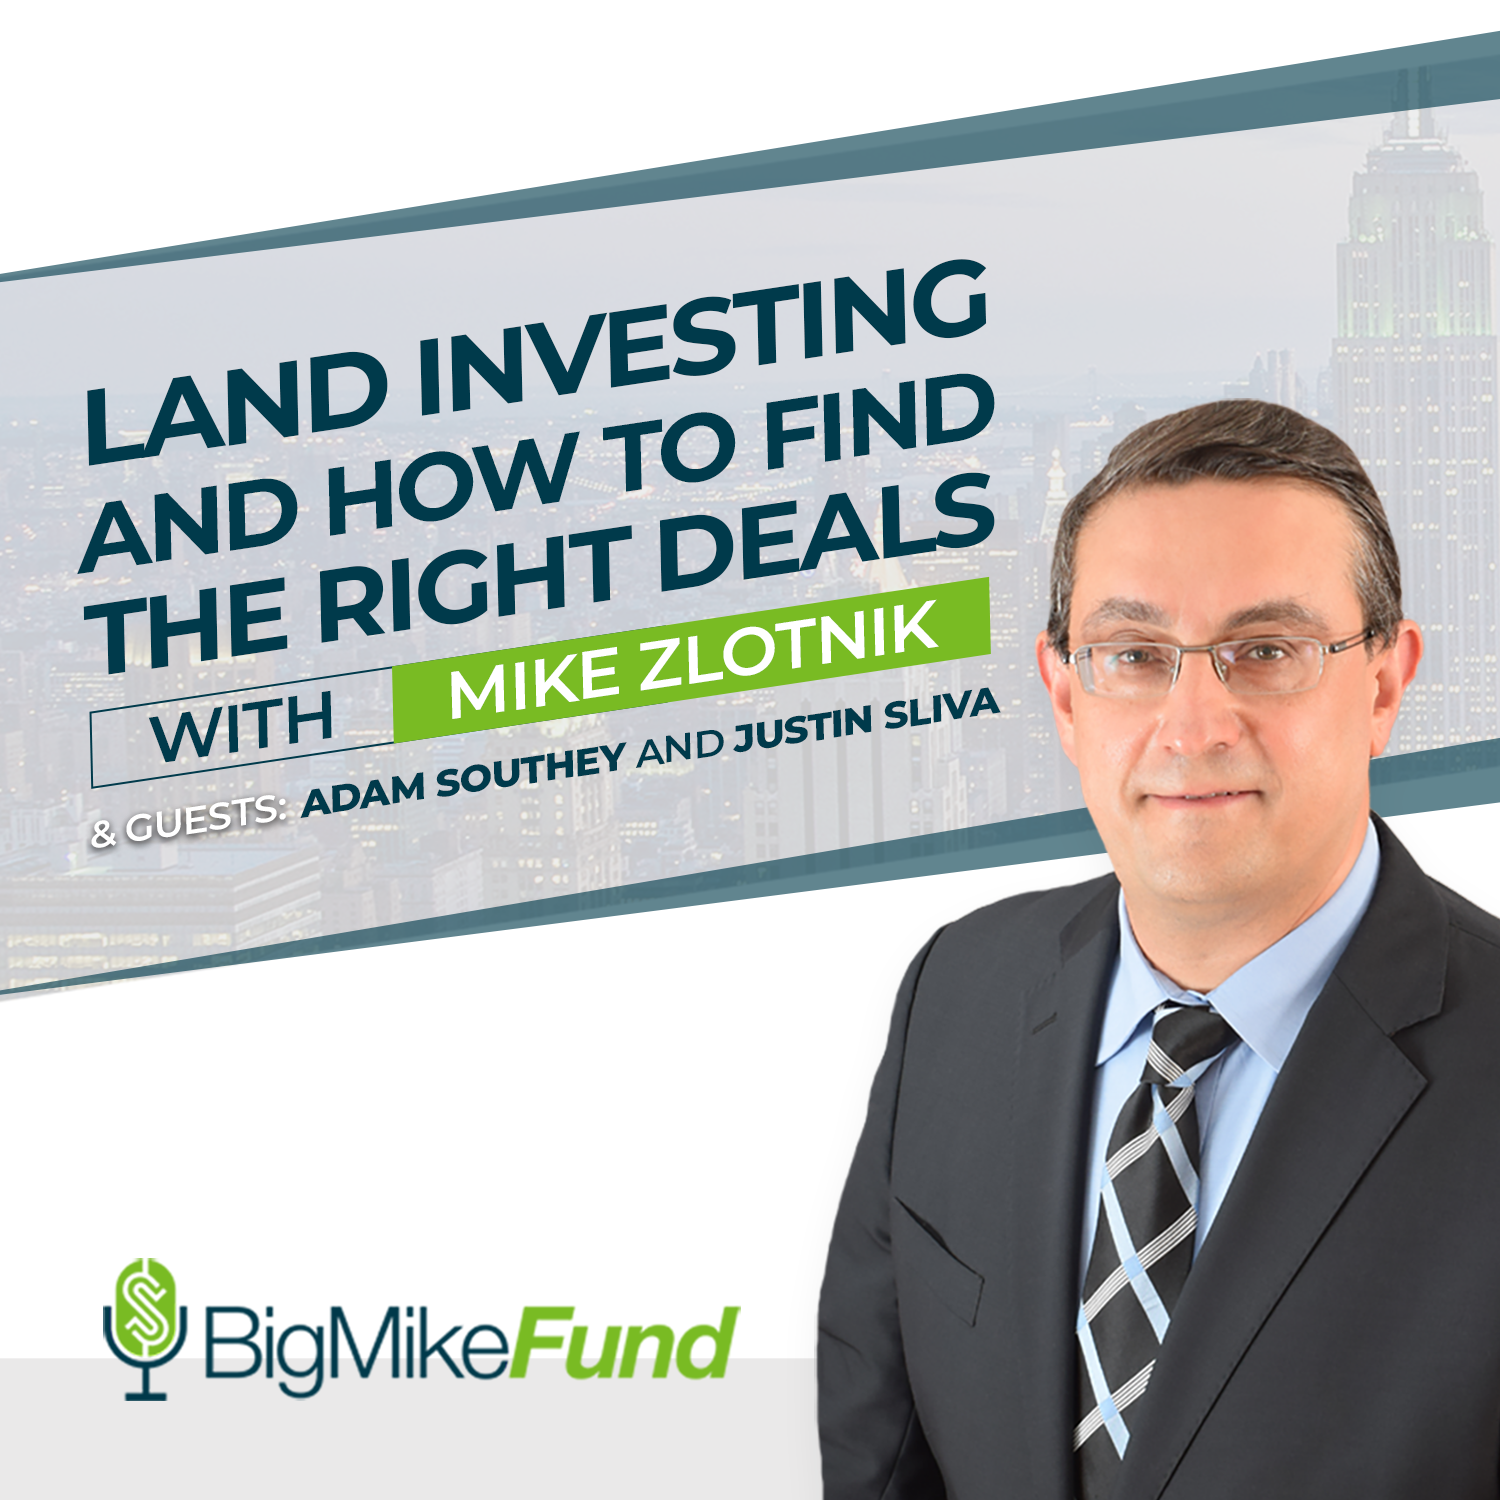 095: Land Investing and How to Find the Right Deals with Adam Southey and Justin Sliva